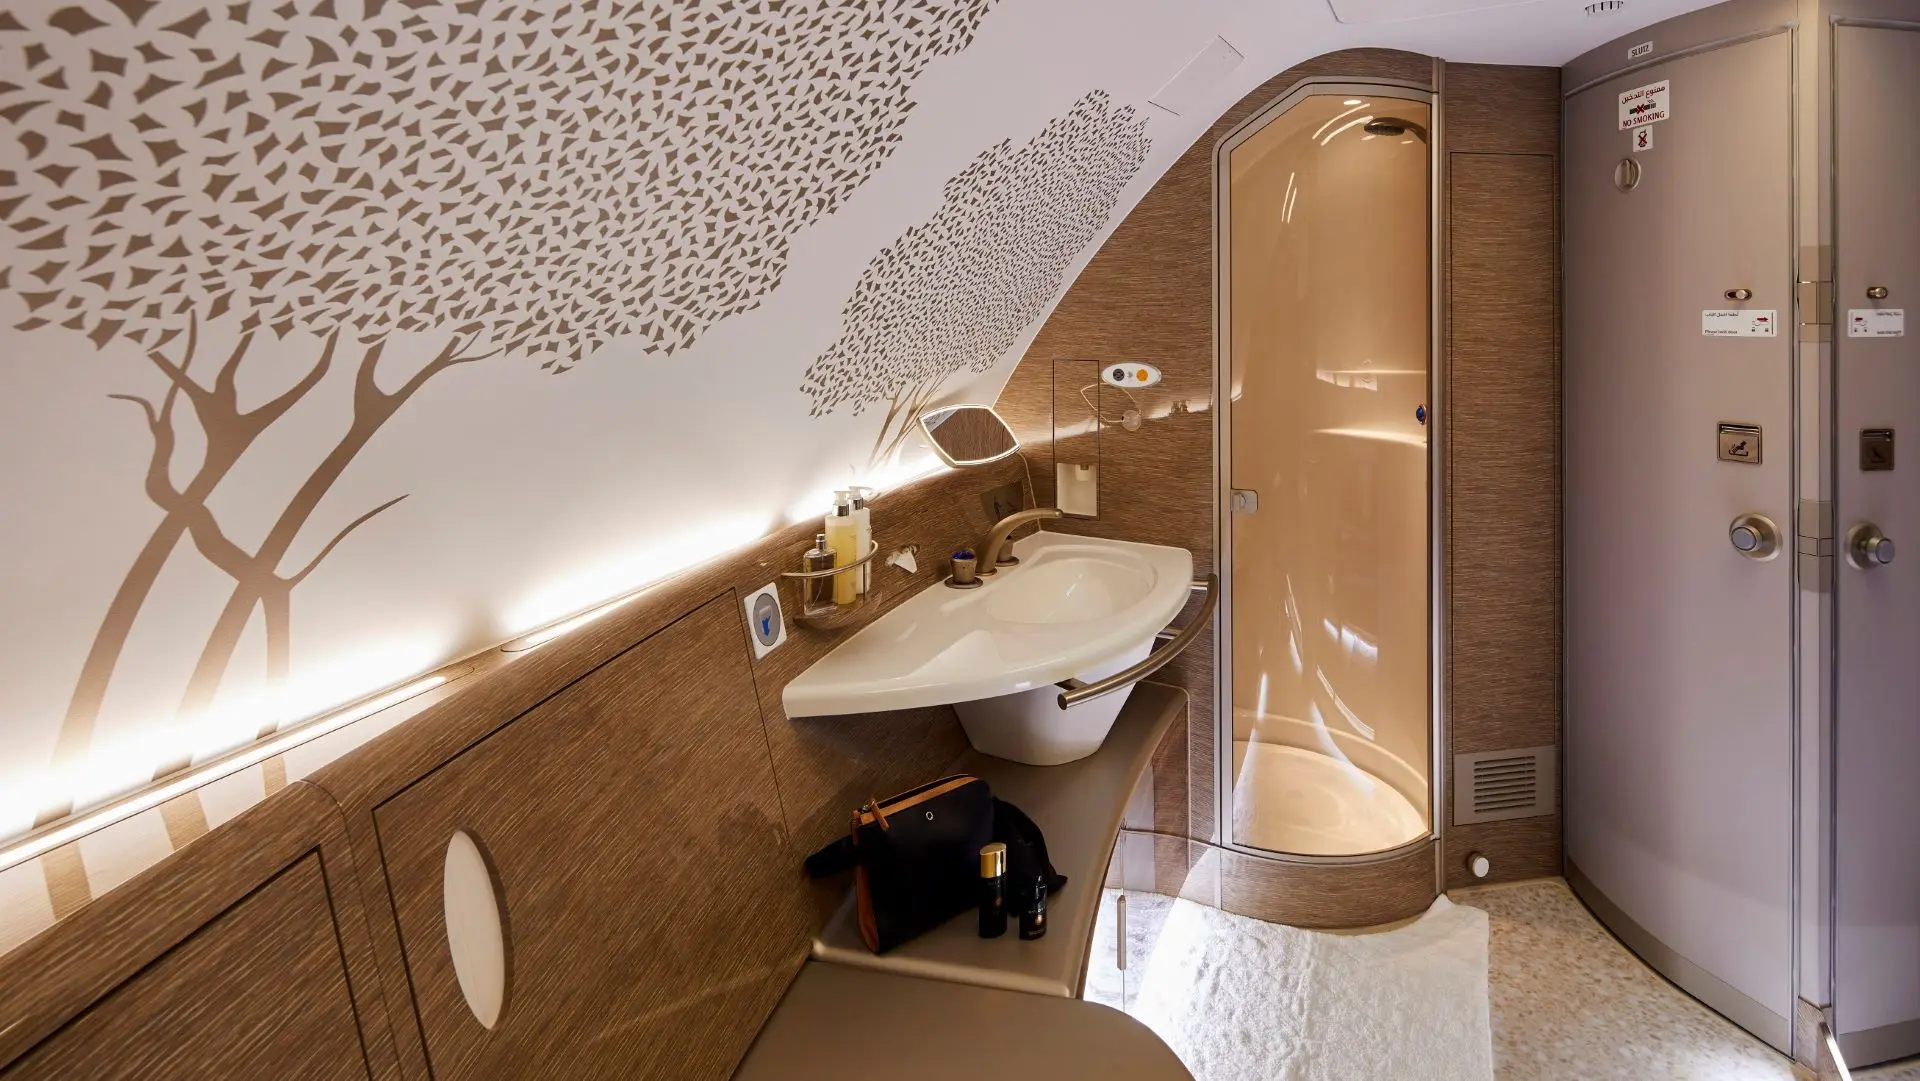 Airlines News - Emirates flies its first refurbished A380 